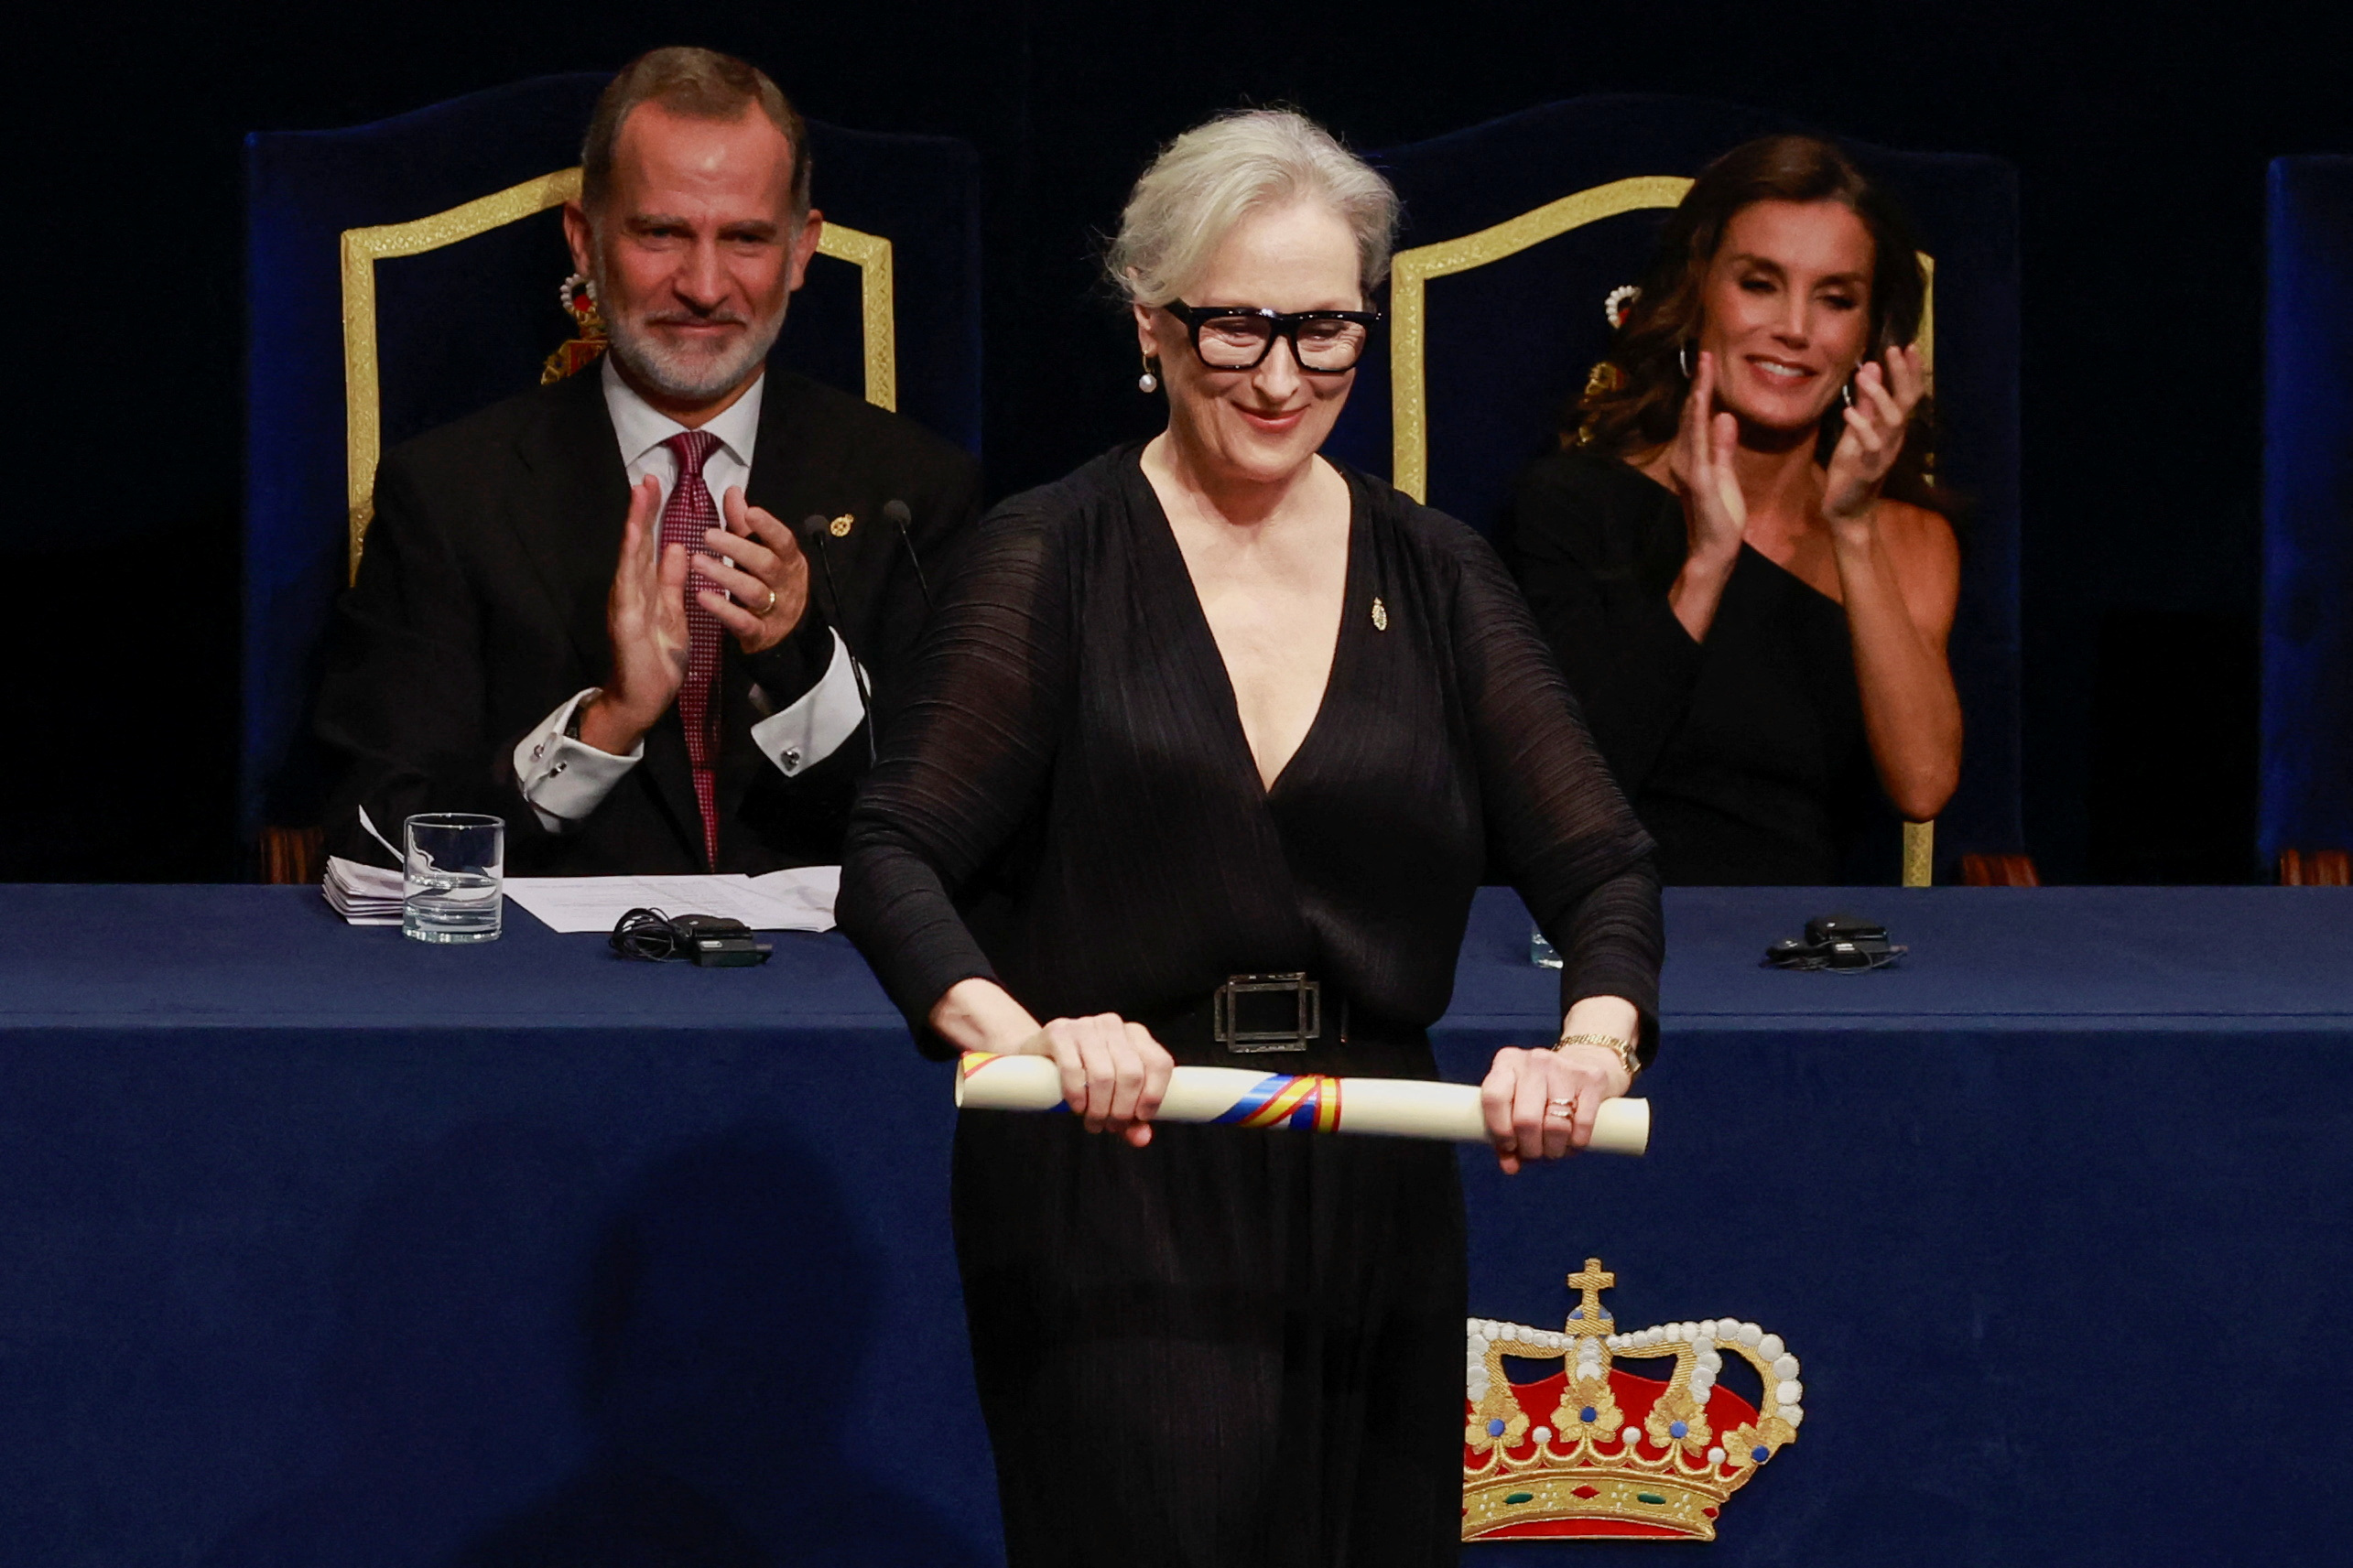 Meryl Streep receives the 2023 Princess of Asturias Award for the Arts in front of Spain's King Felipe VI and Queen Letizia.